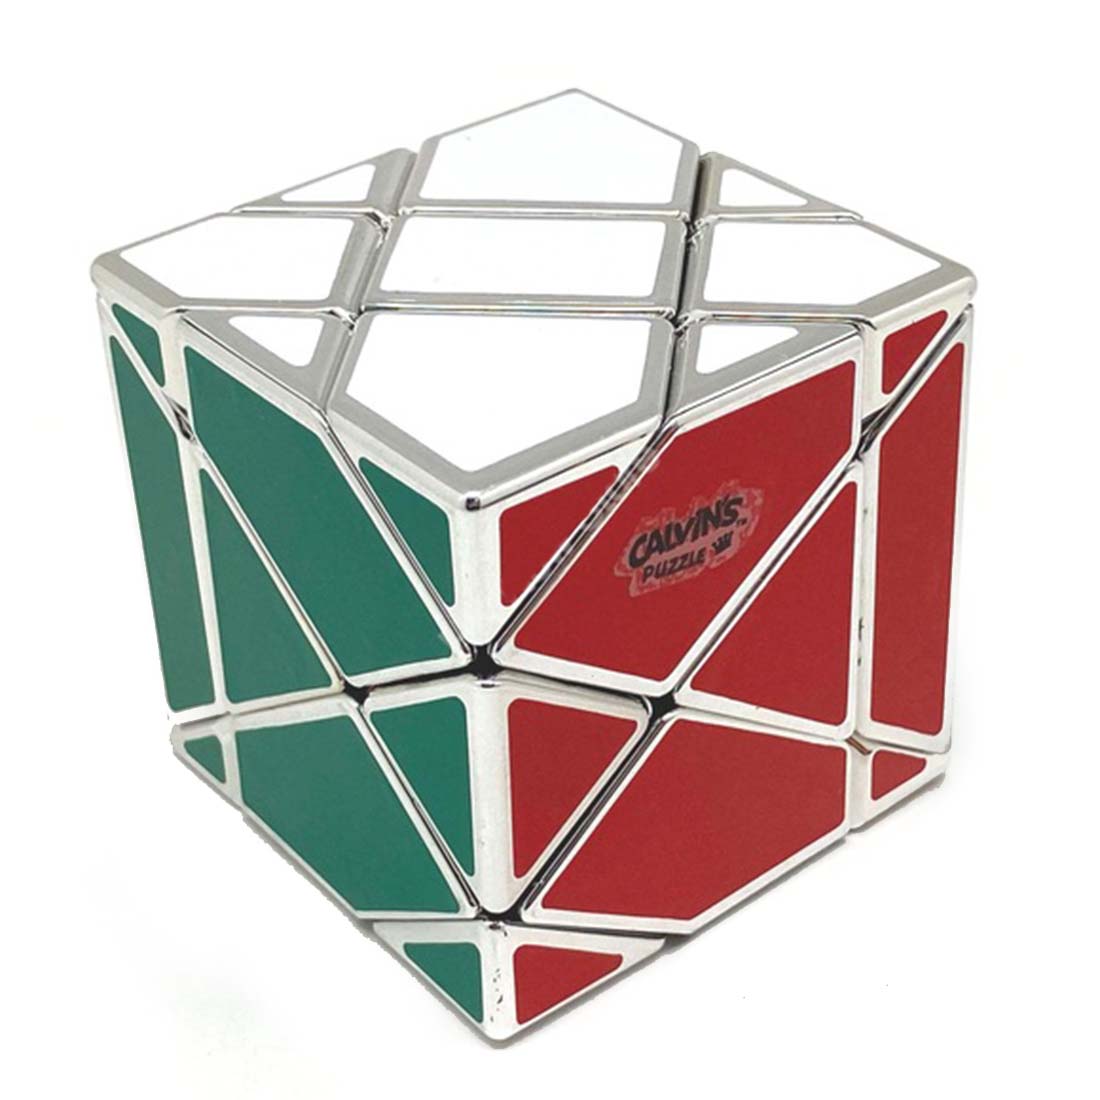 Calvin's Super Fisher 3x3 Speed Cube with 6-Color Stickers (Silver/Limited Edition)